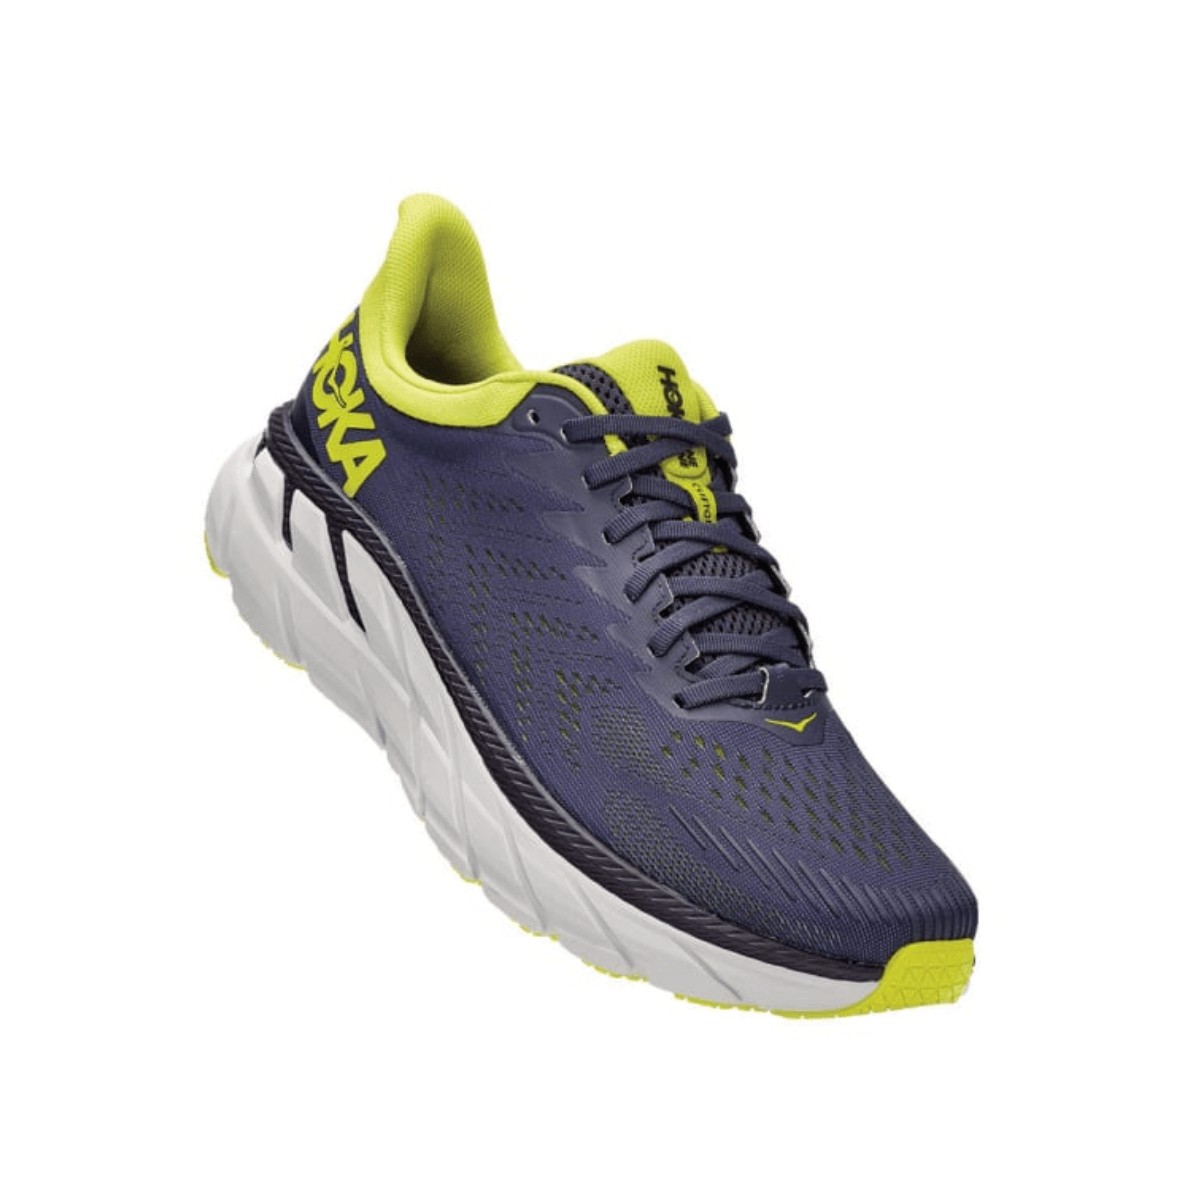 Hoka One One Clifton 7 Shoes Navy Blue Lime Green